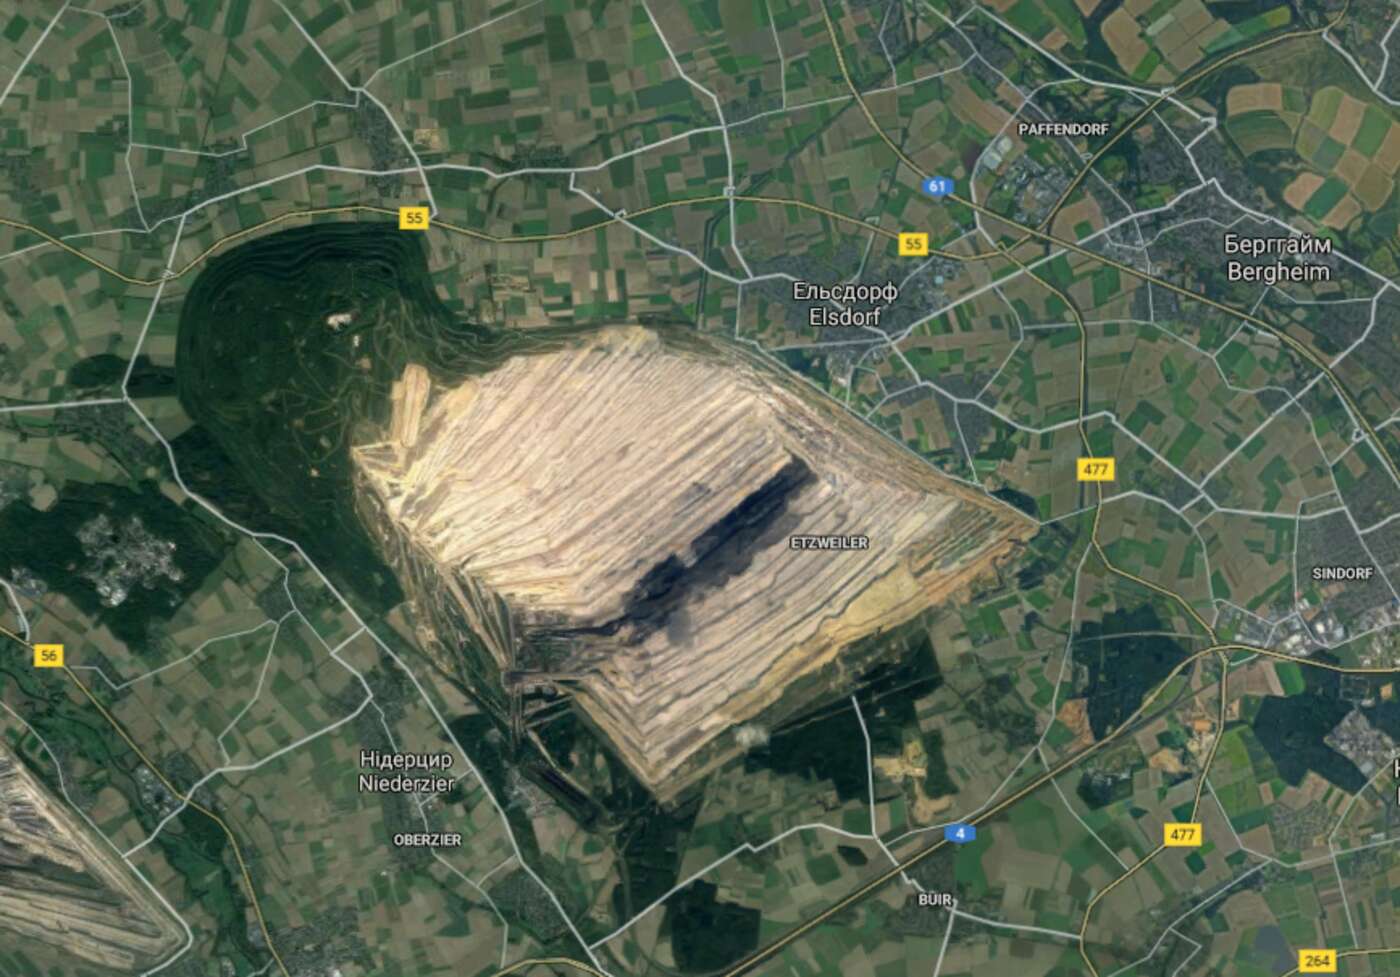 The satellite image of the Hambach that shows opencast mine and small forest